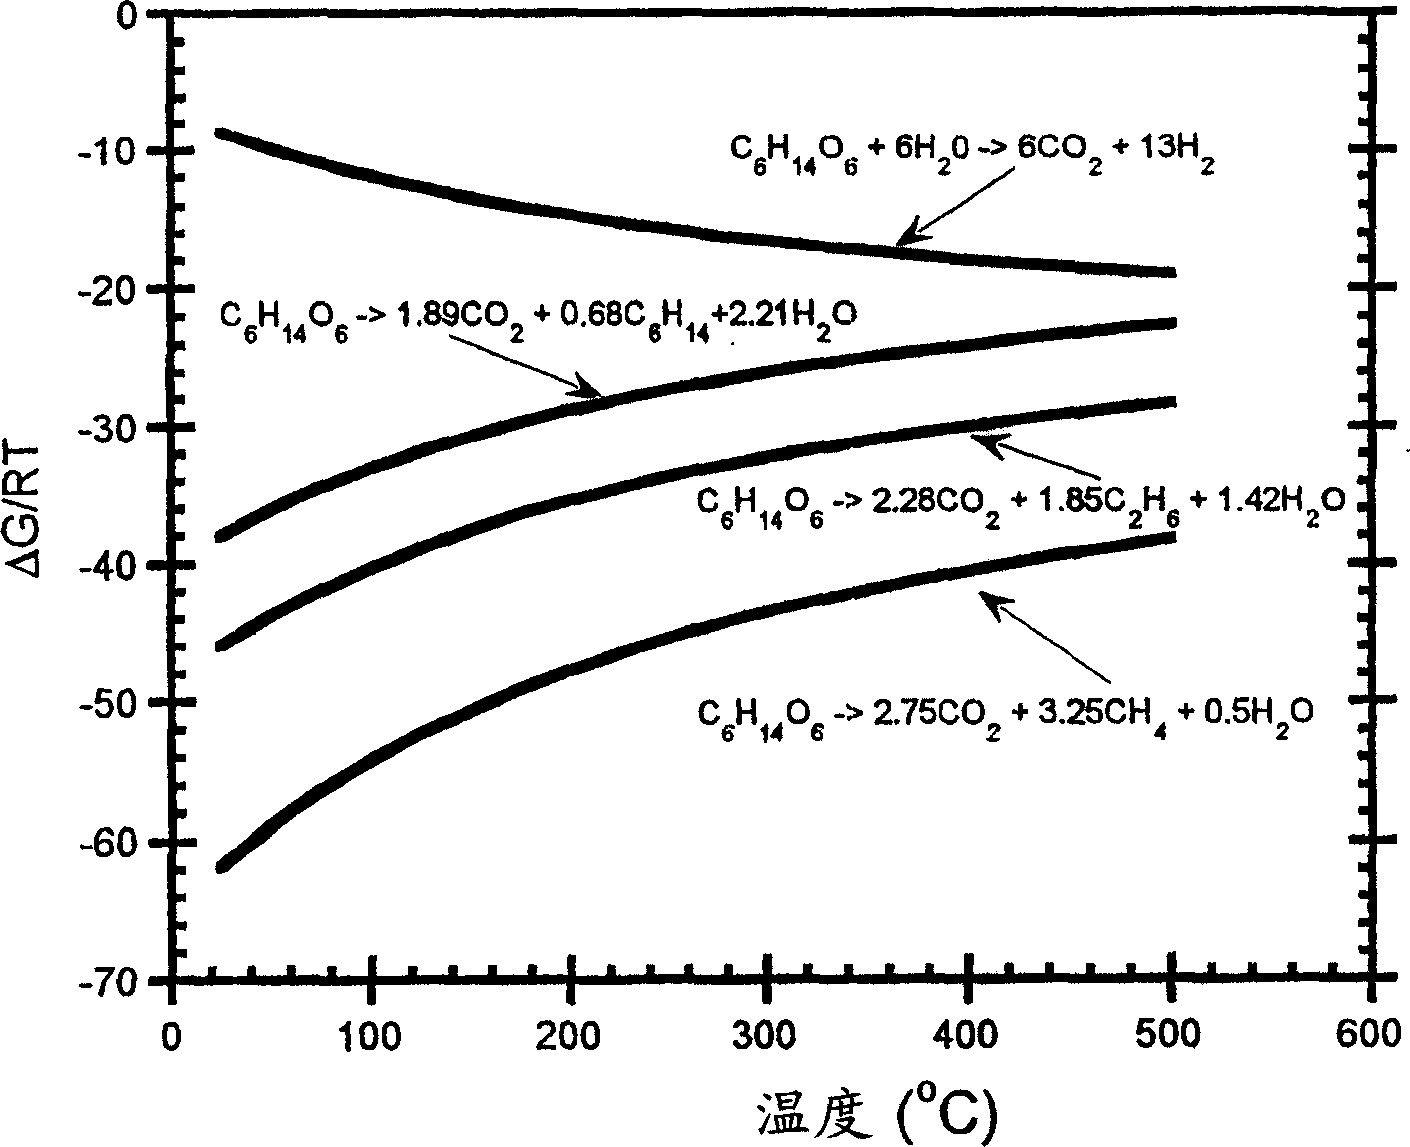 Low-temperature hydrocarbon production from oxygenated hydrocarbons